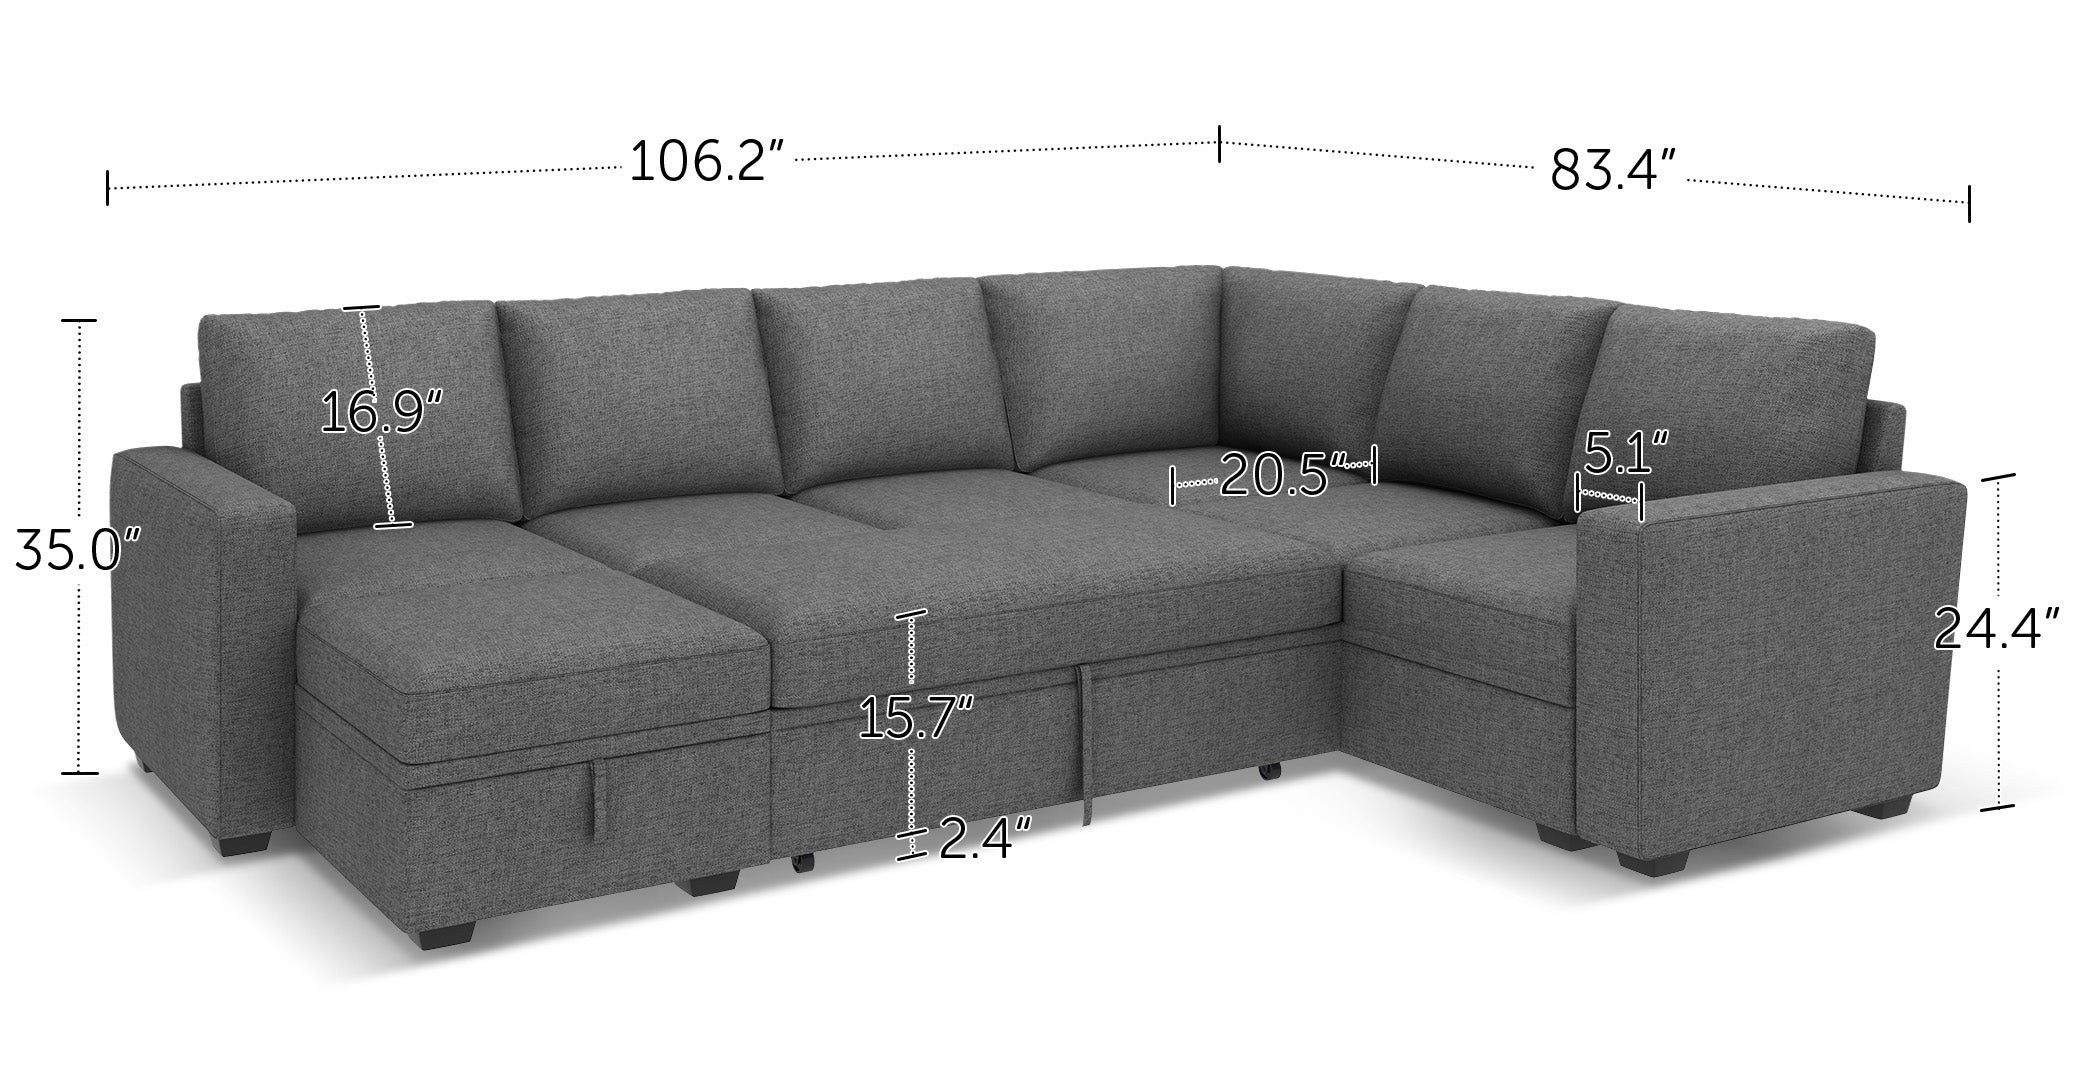 Velvet Modular Sleeper Sectional With Storage Space With Measurements 